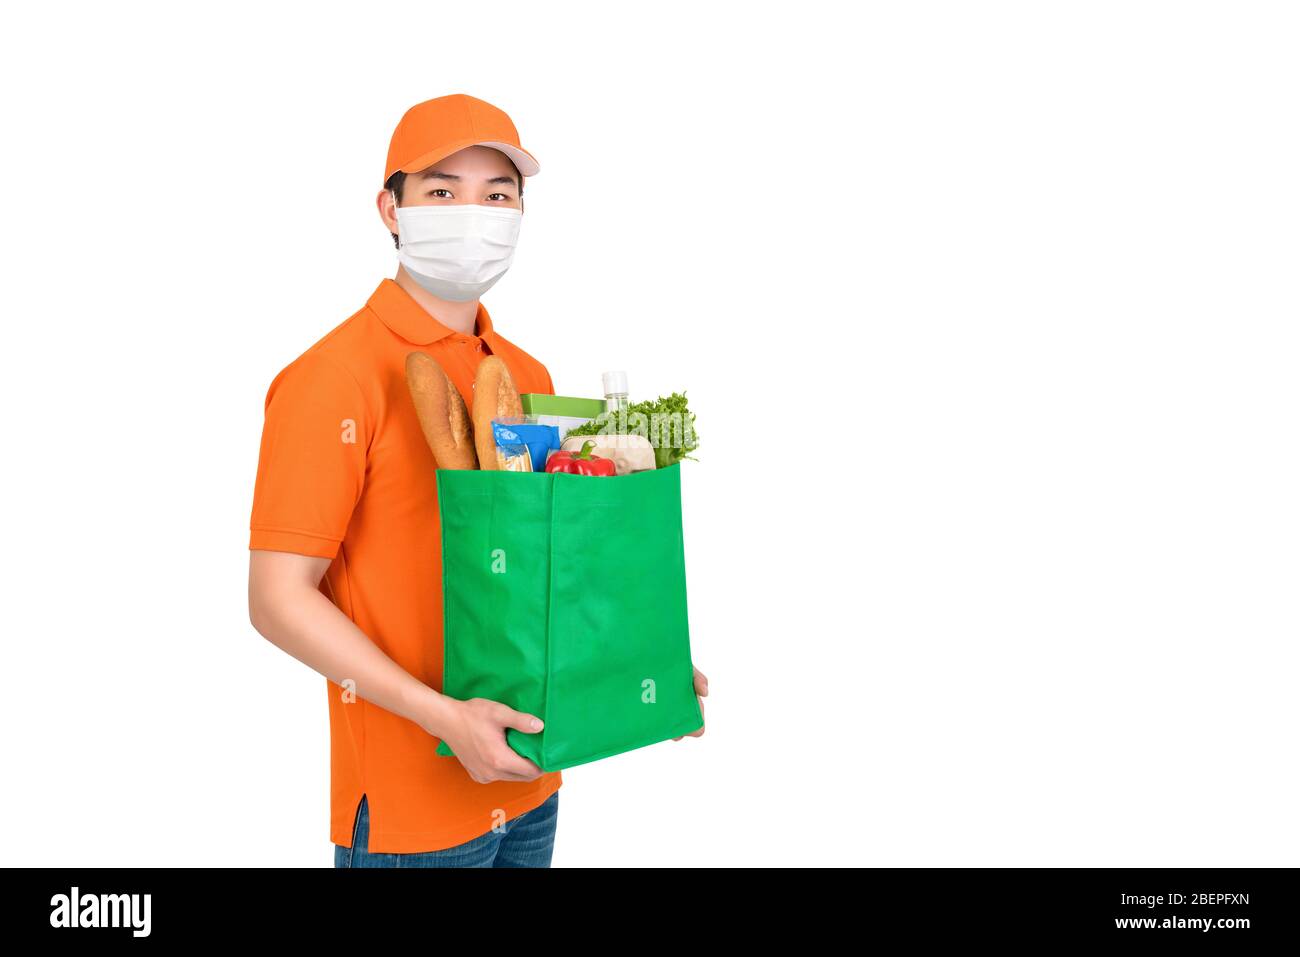 Hygienic man wearing medical mask carrying supermarket grocery shopping bag offering home delivery service isolated in white background Stock Photo